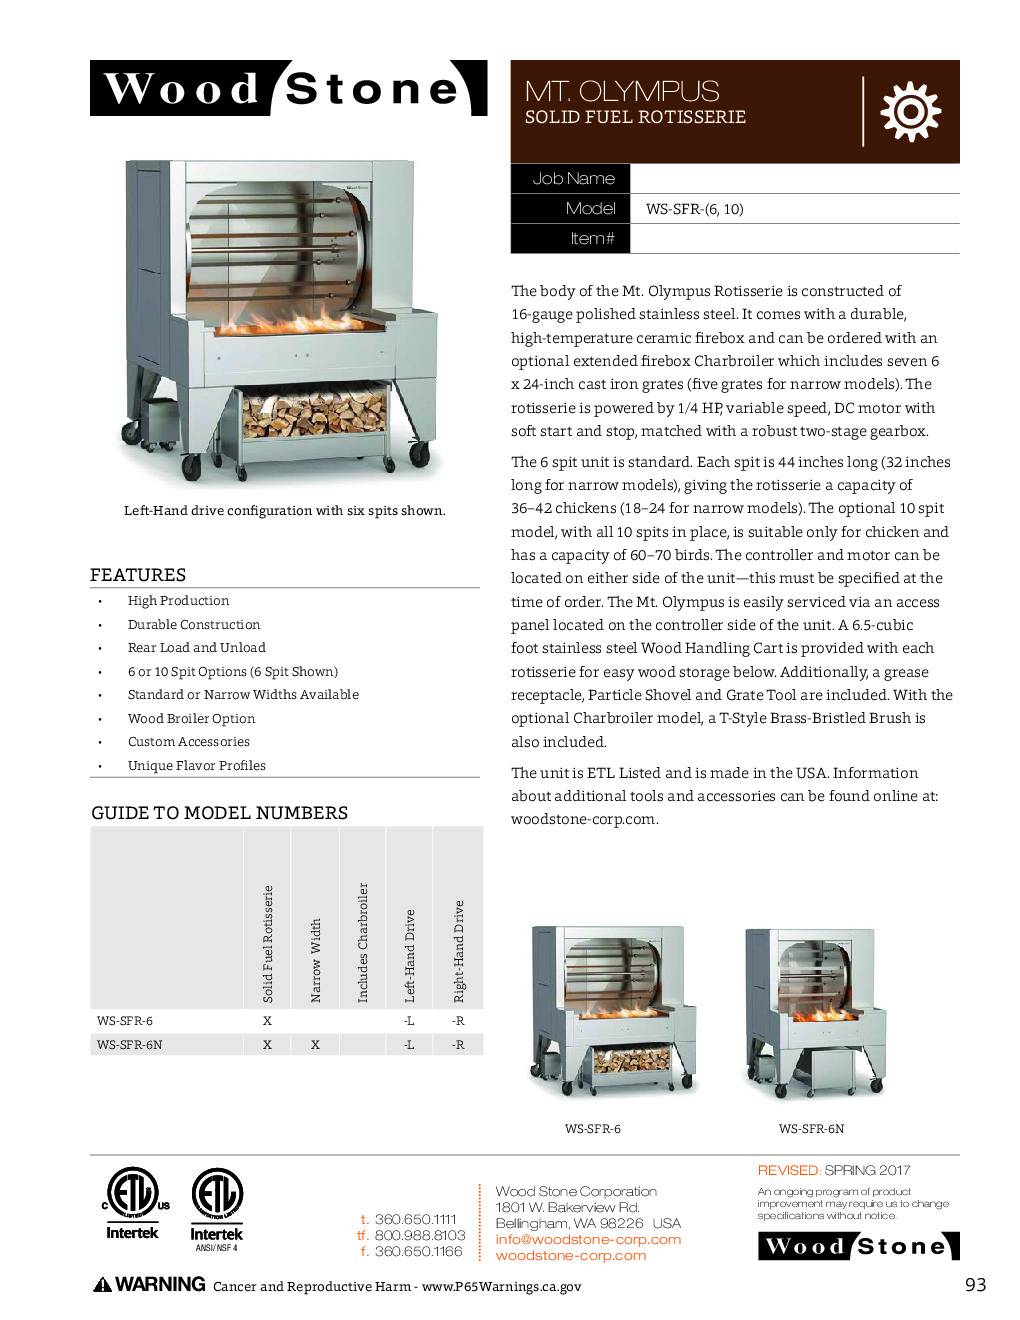 Wood Stone WS-SFR-10-BROILER Rotisserie Solid-Fuel Oven